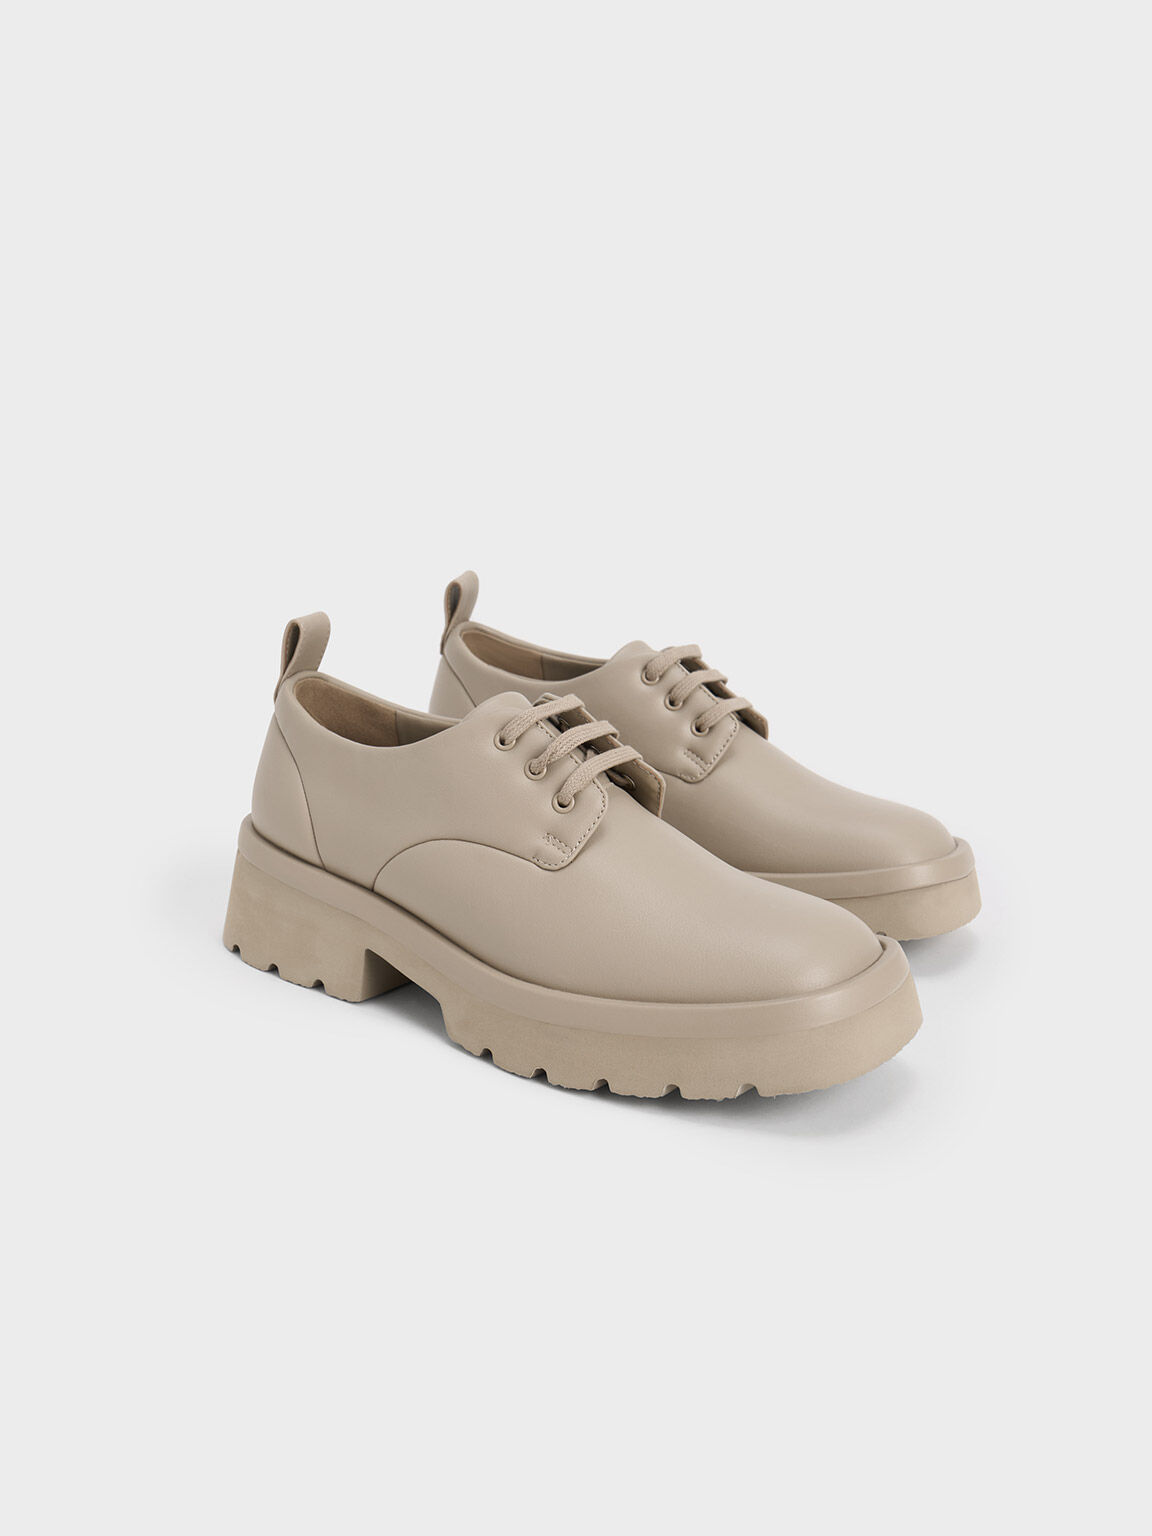 Ridged Sole Lace-Up Oxfords, Taupe, hi-res